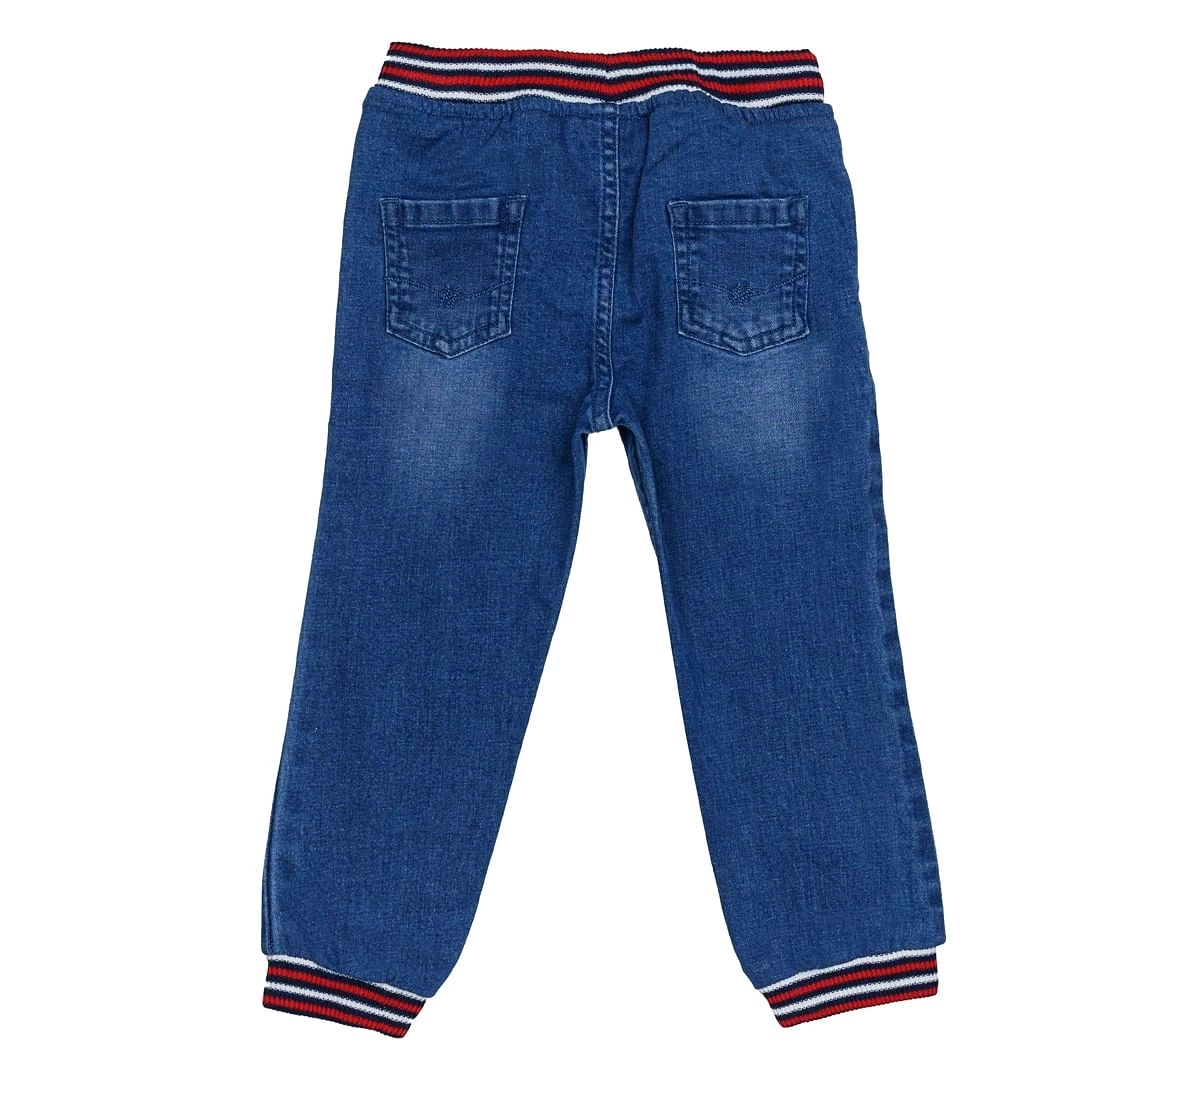 Boy Kids Jeans With Shirts Casual Dress at Best Price in Barasat | Sumit  Enterprises